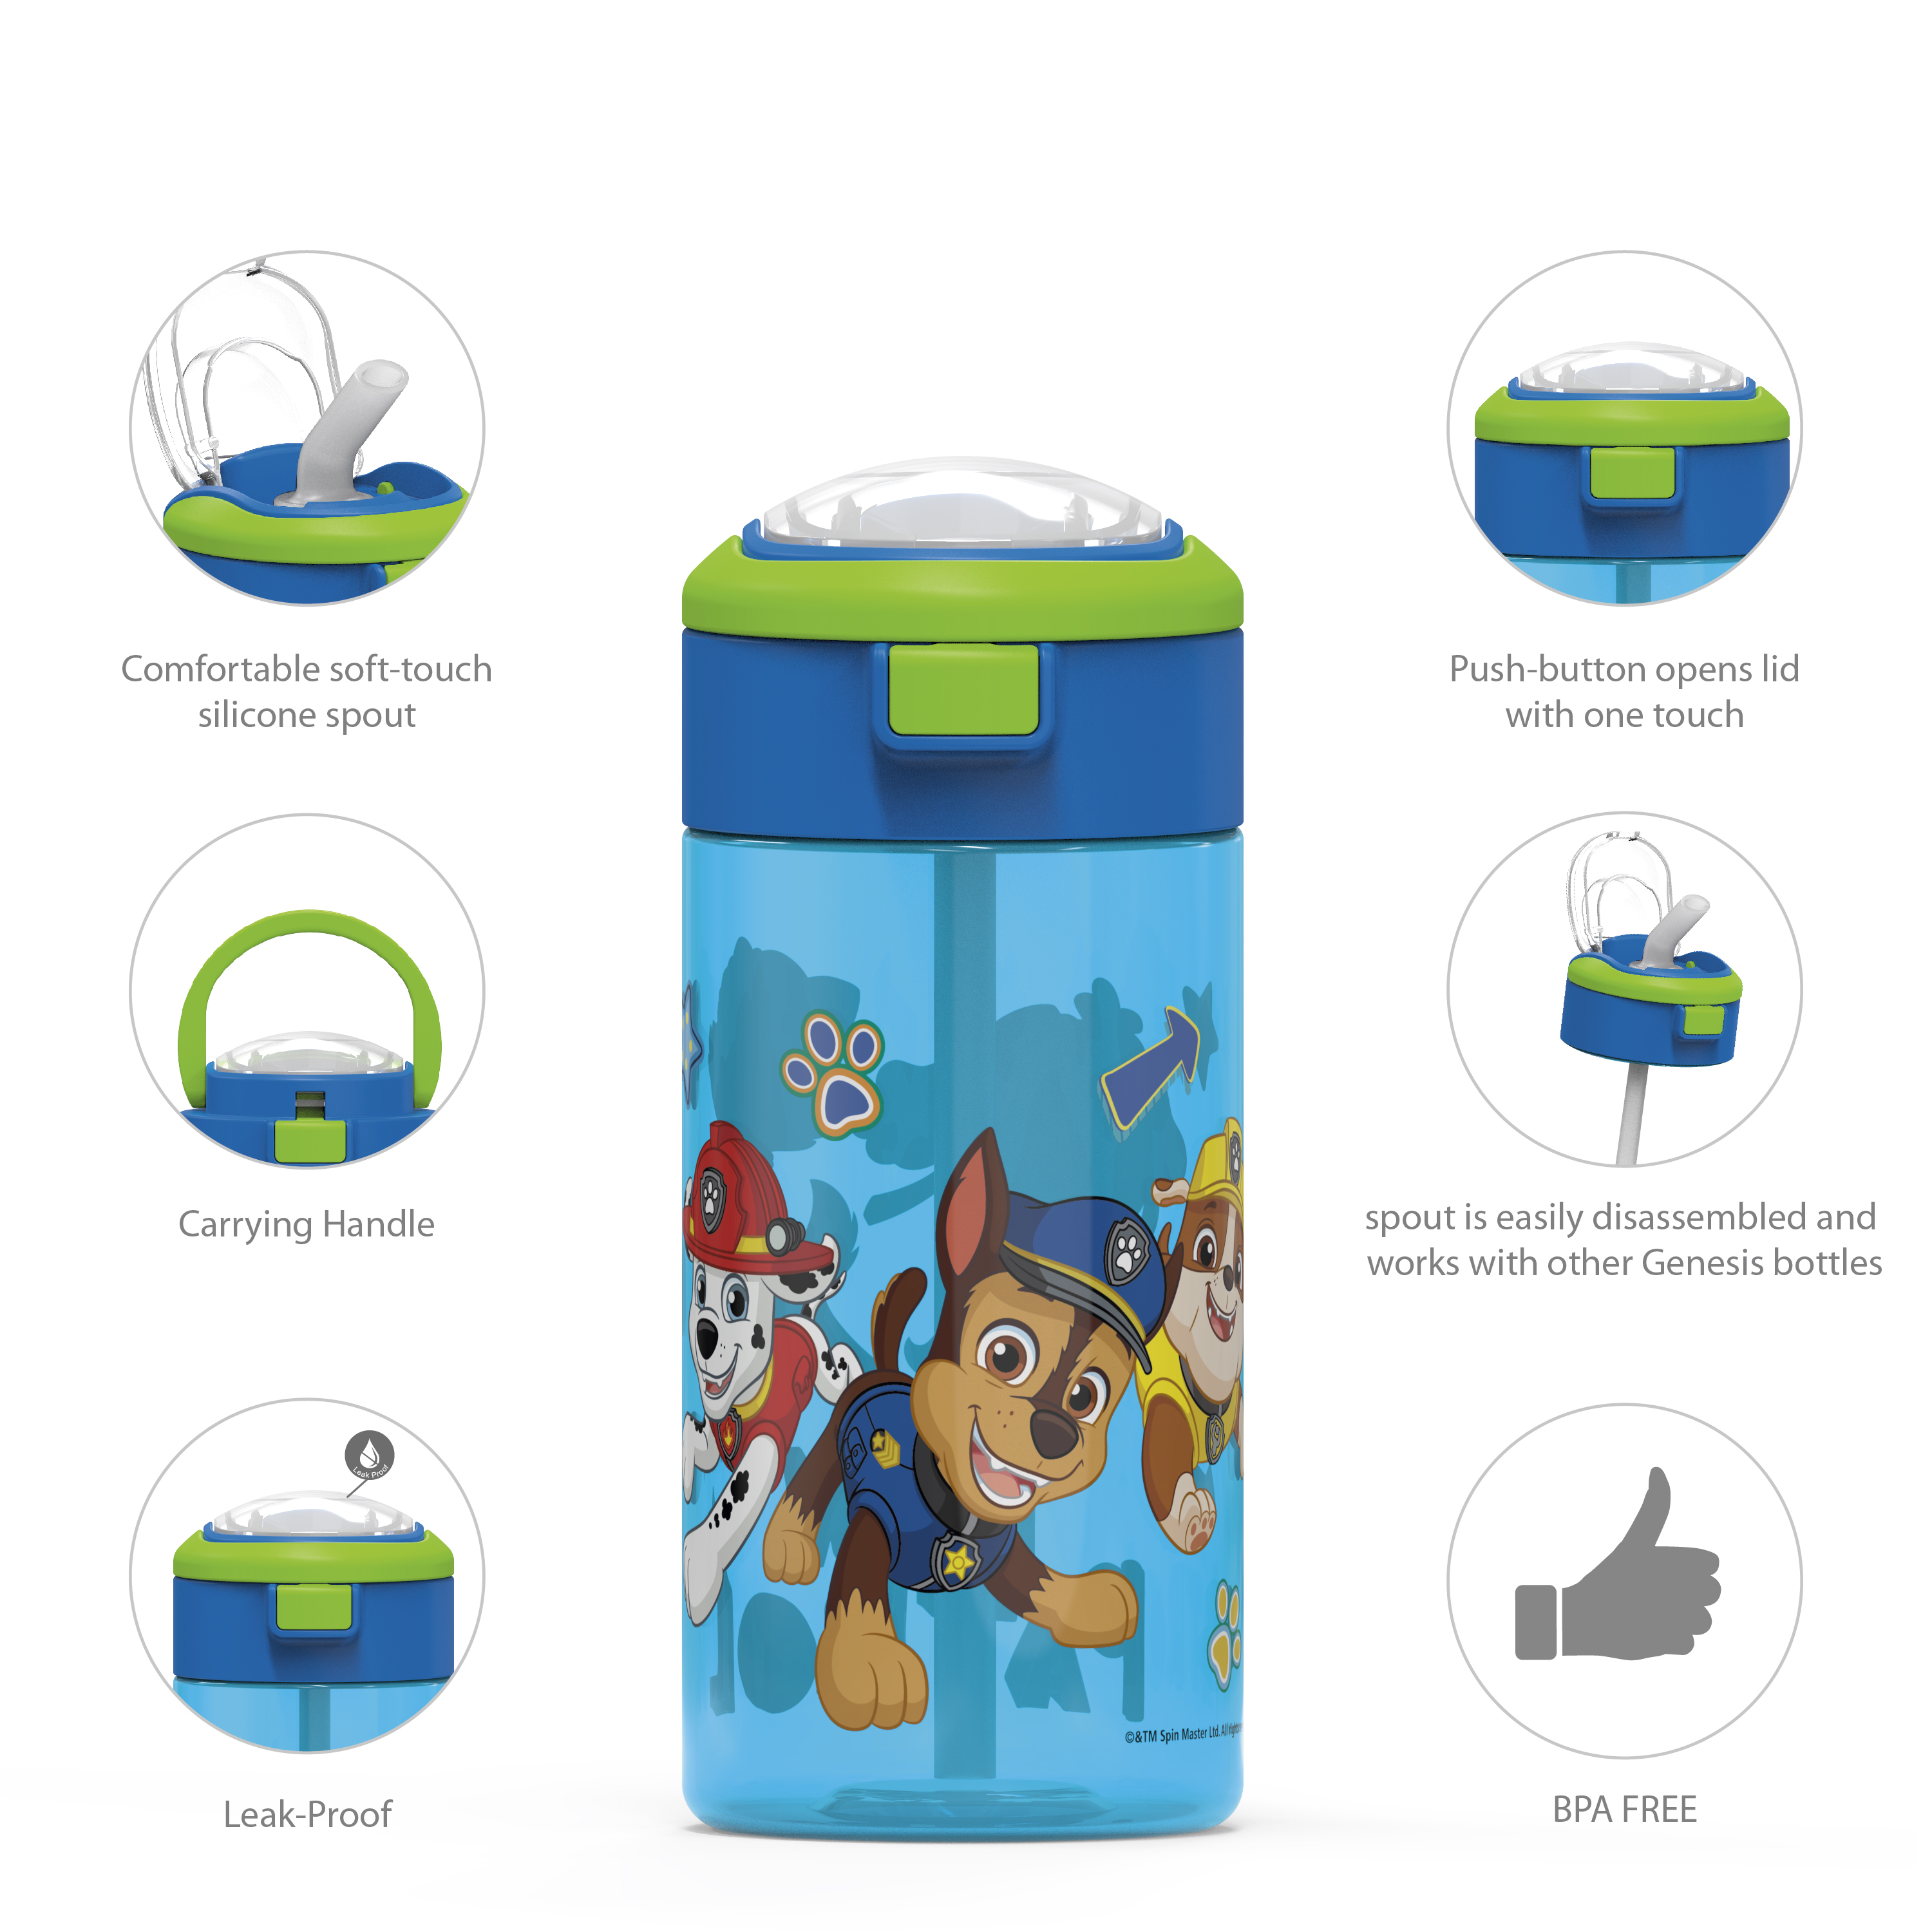 Paw Patrol 18 ounce Reusable Plastic Water Bottle with Push-button lid, Chase, Marshall & Rubble slideshow image 5